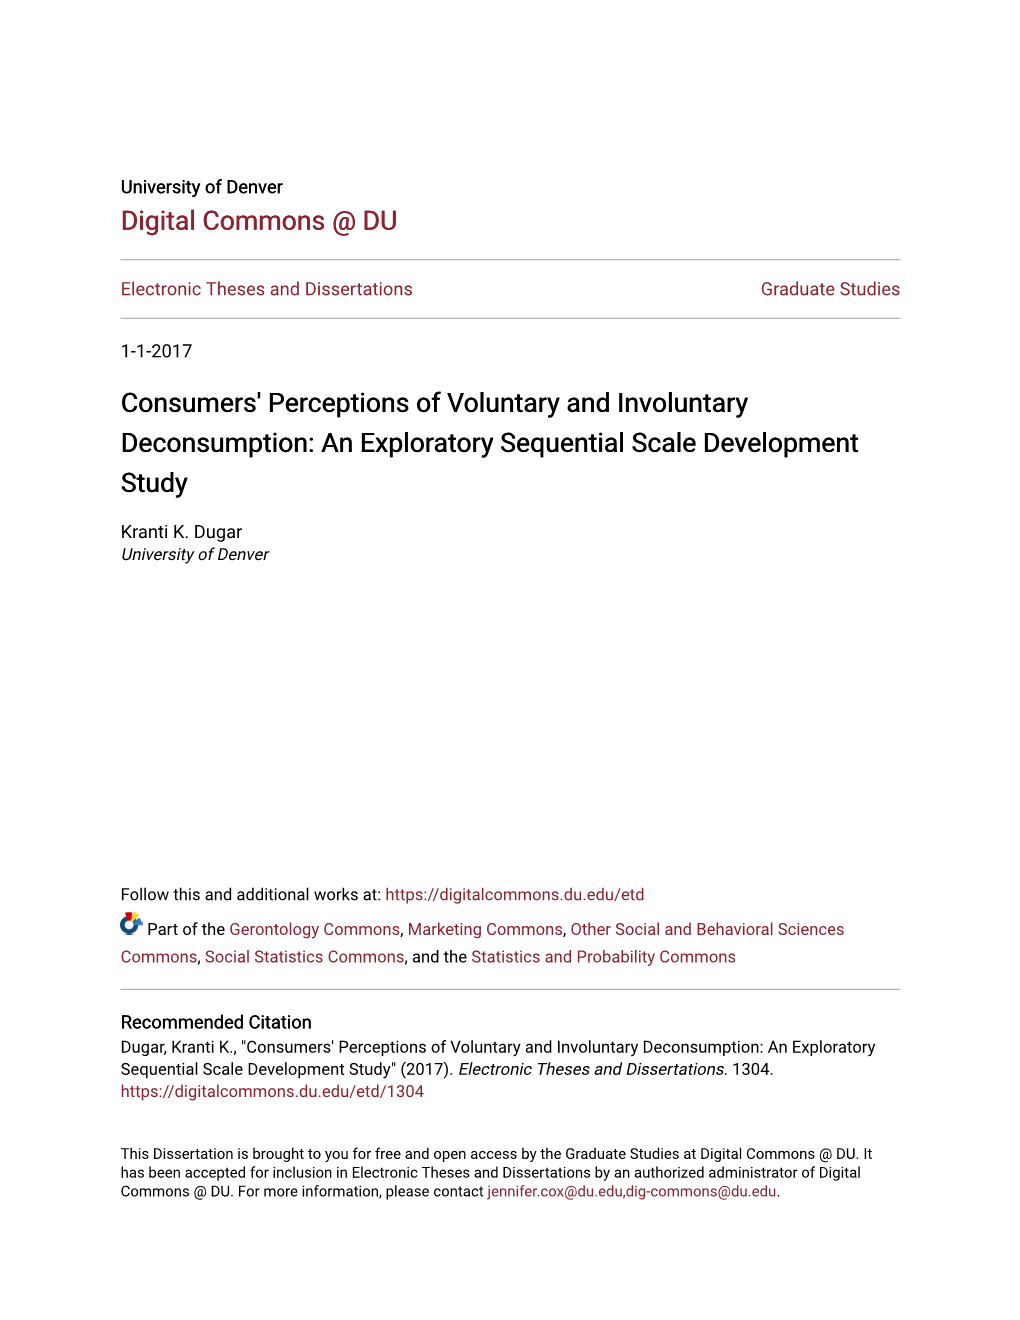 Consumers' Perceptions of Voluntary and Involuntary Deconsumption: an Exploratory Sequential Scale Development Study